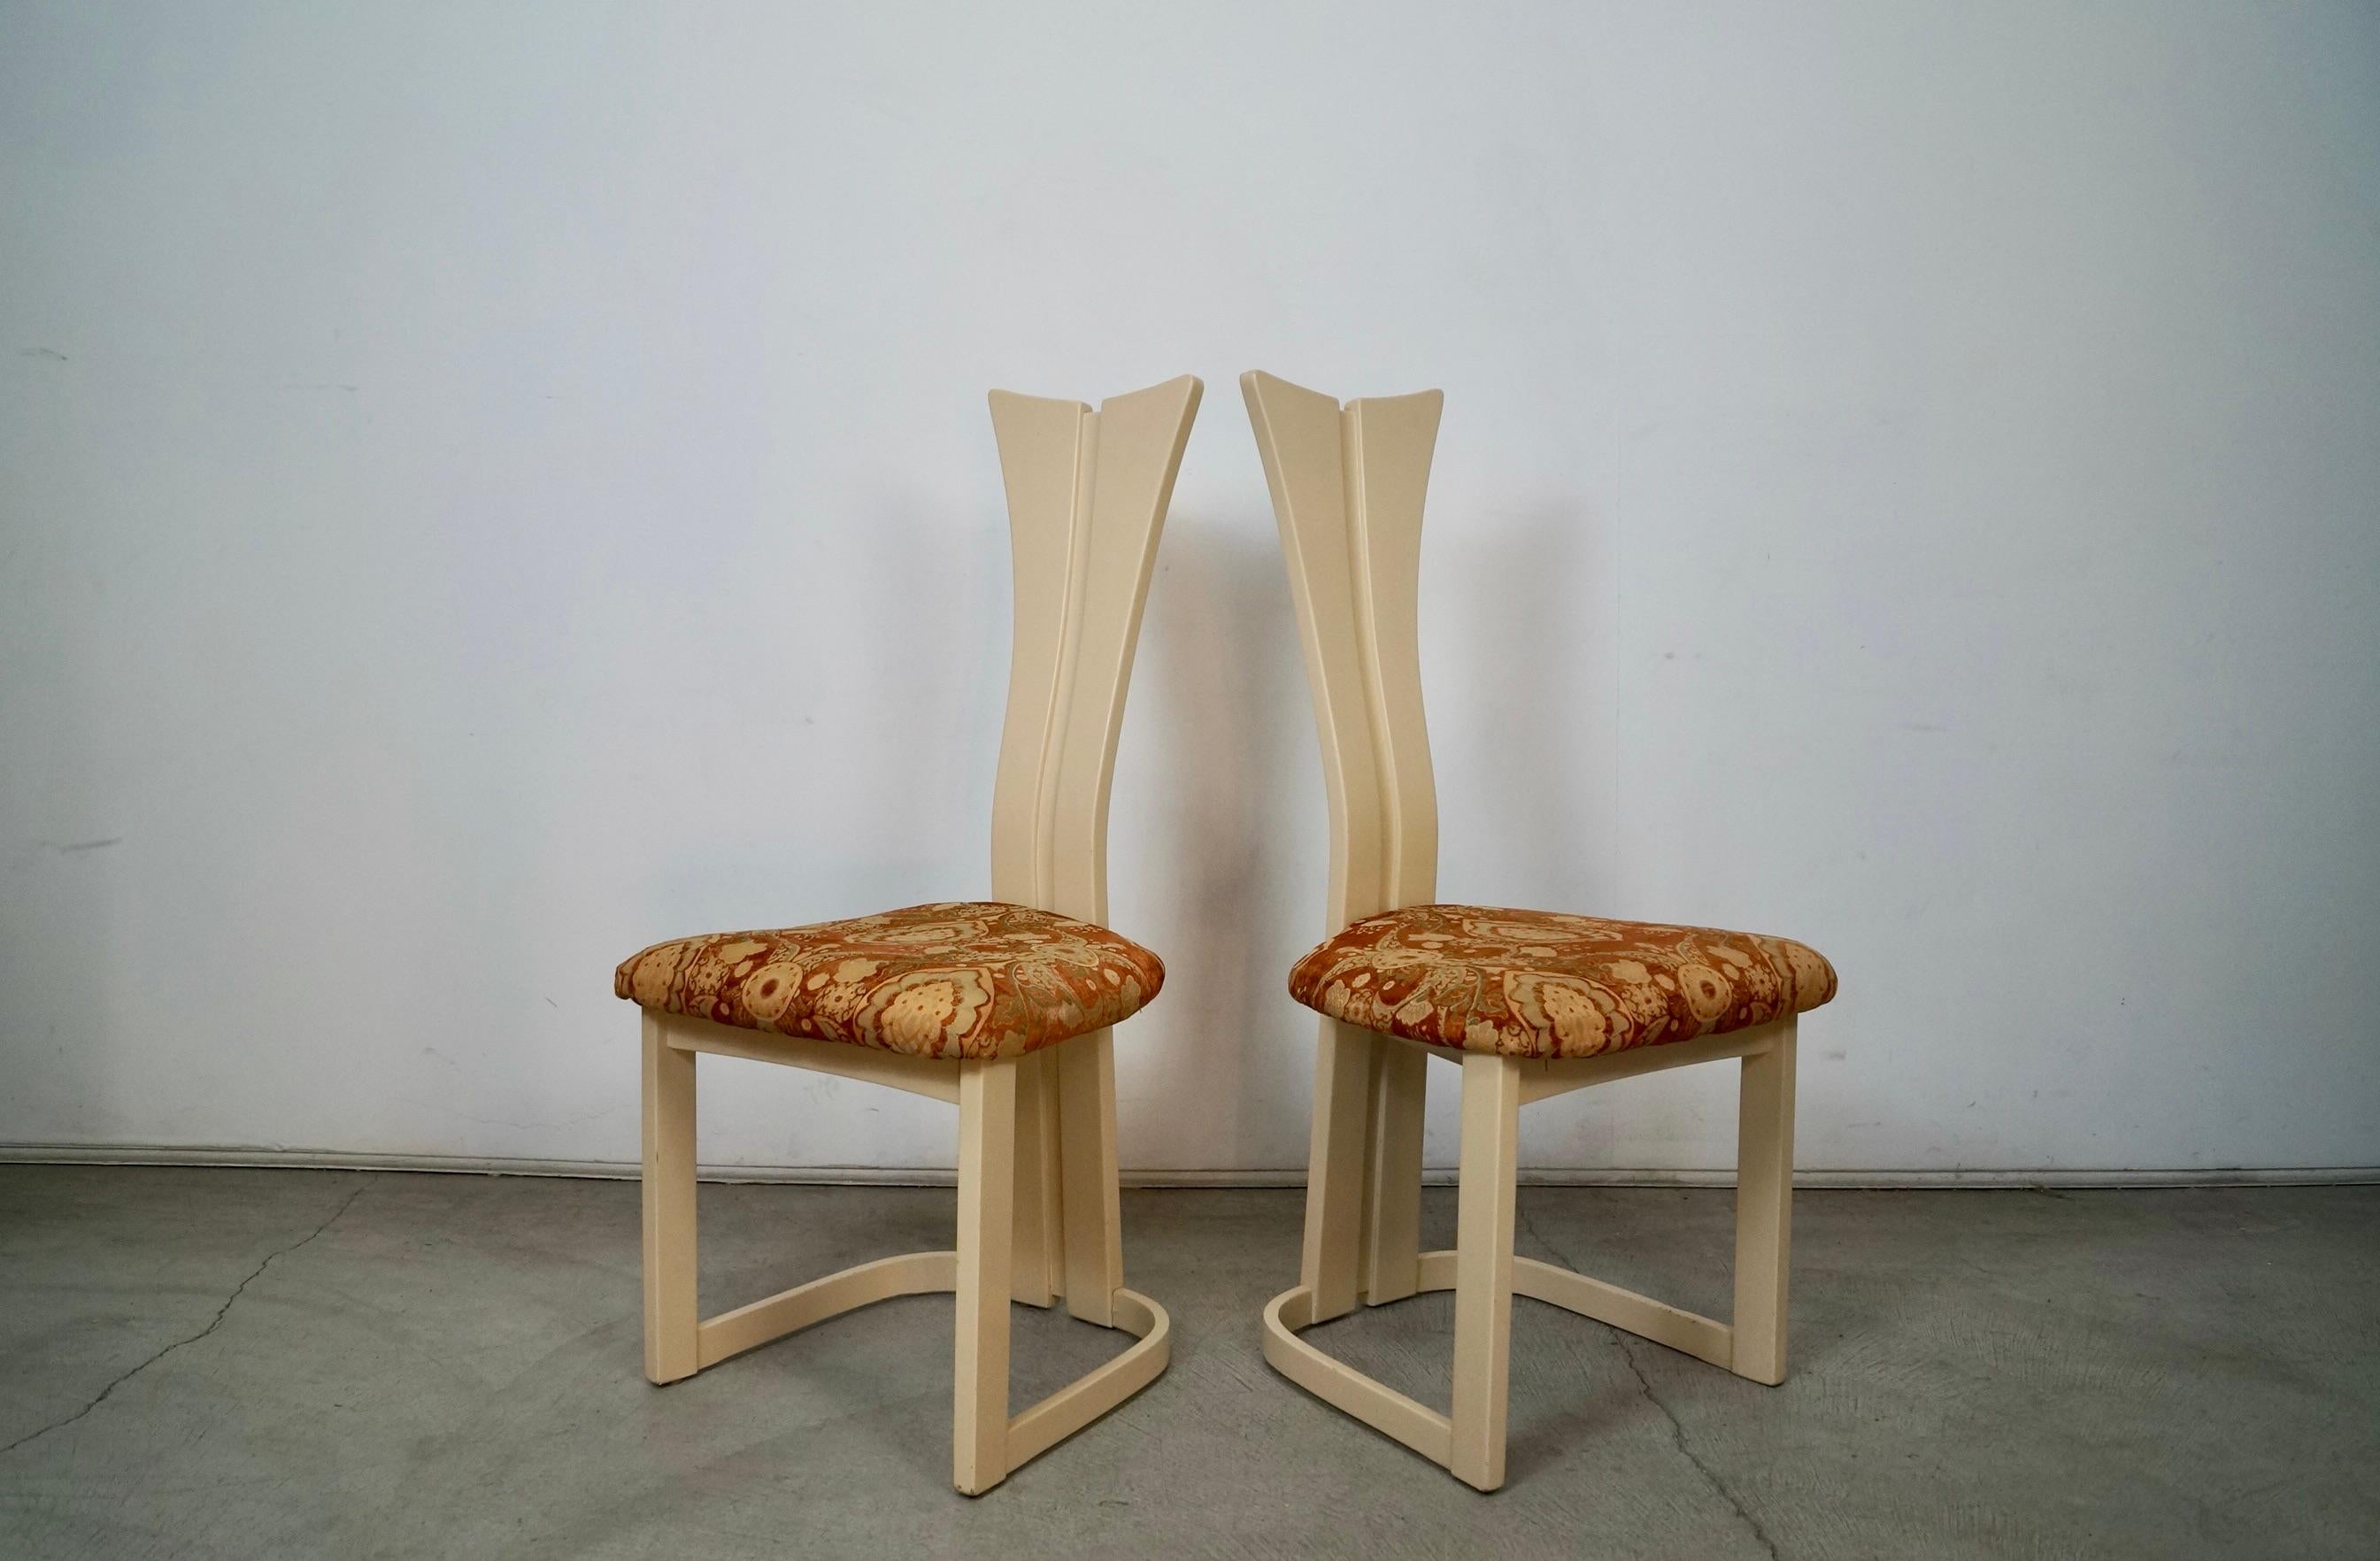 1970's Postmodern Art Deco Italian Lacquered Dining Chairs - Set of Six For Sale 3